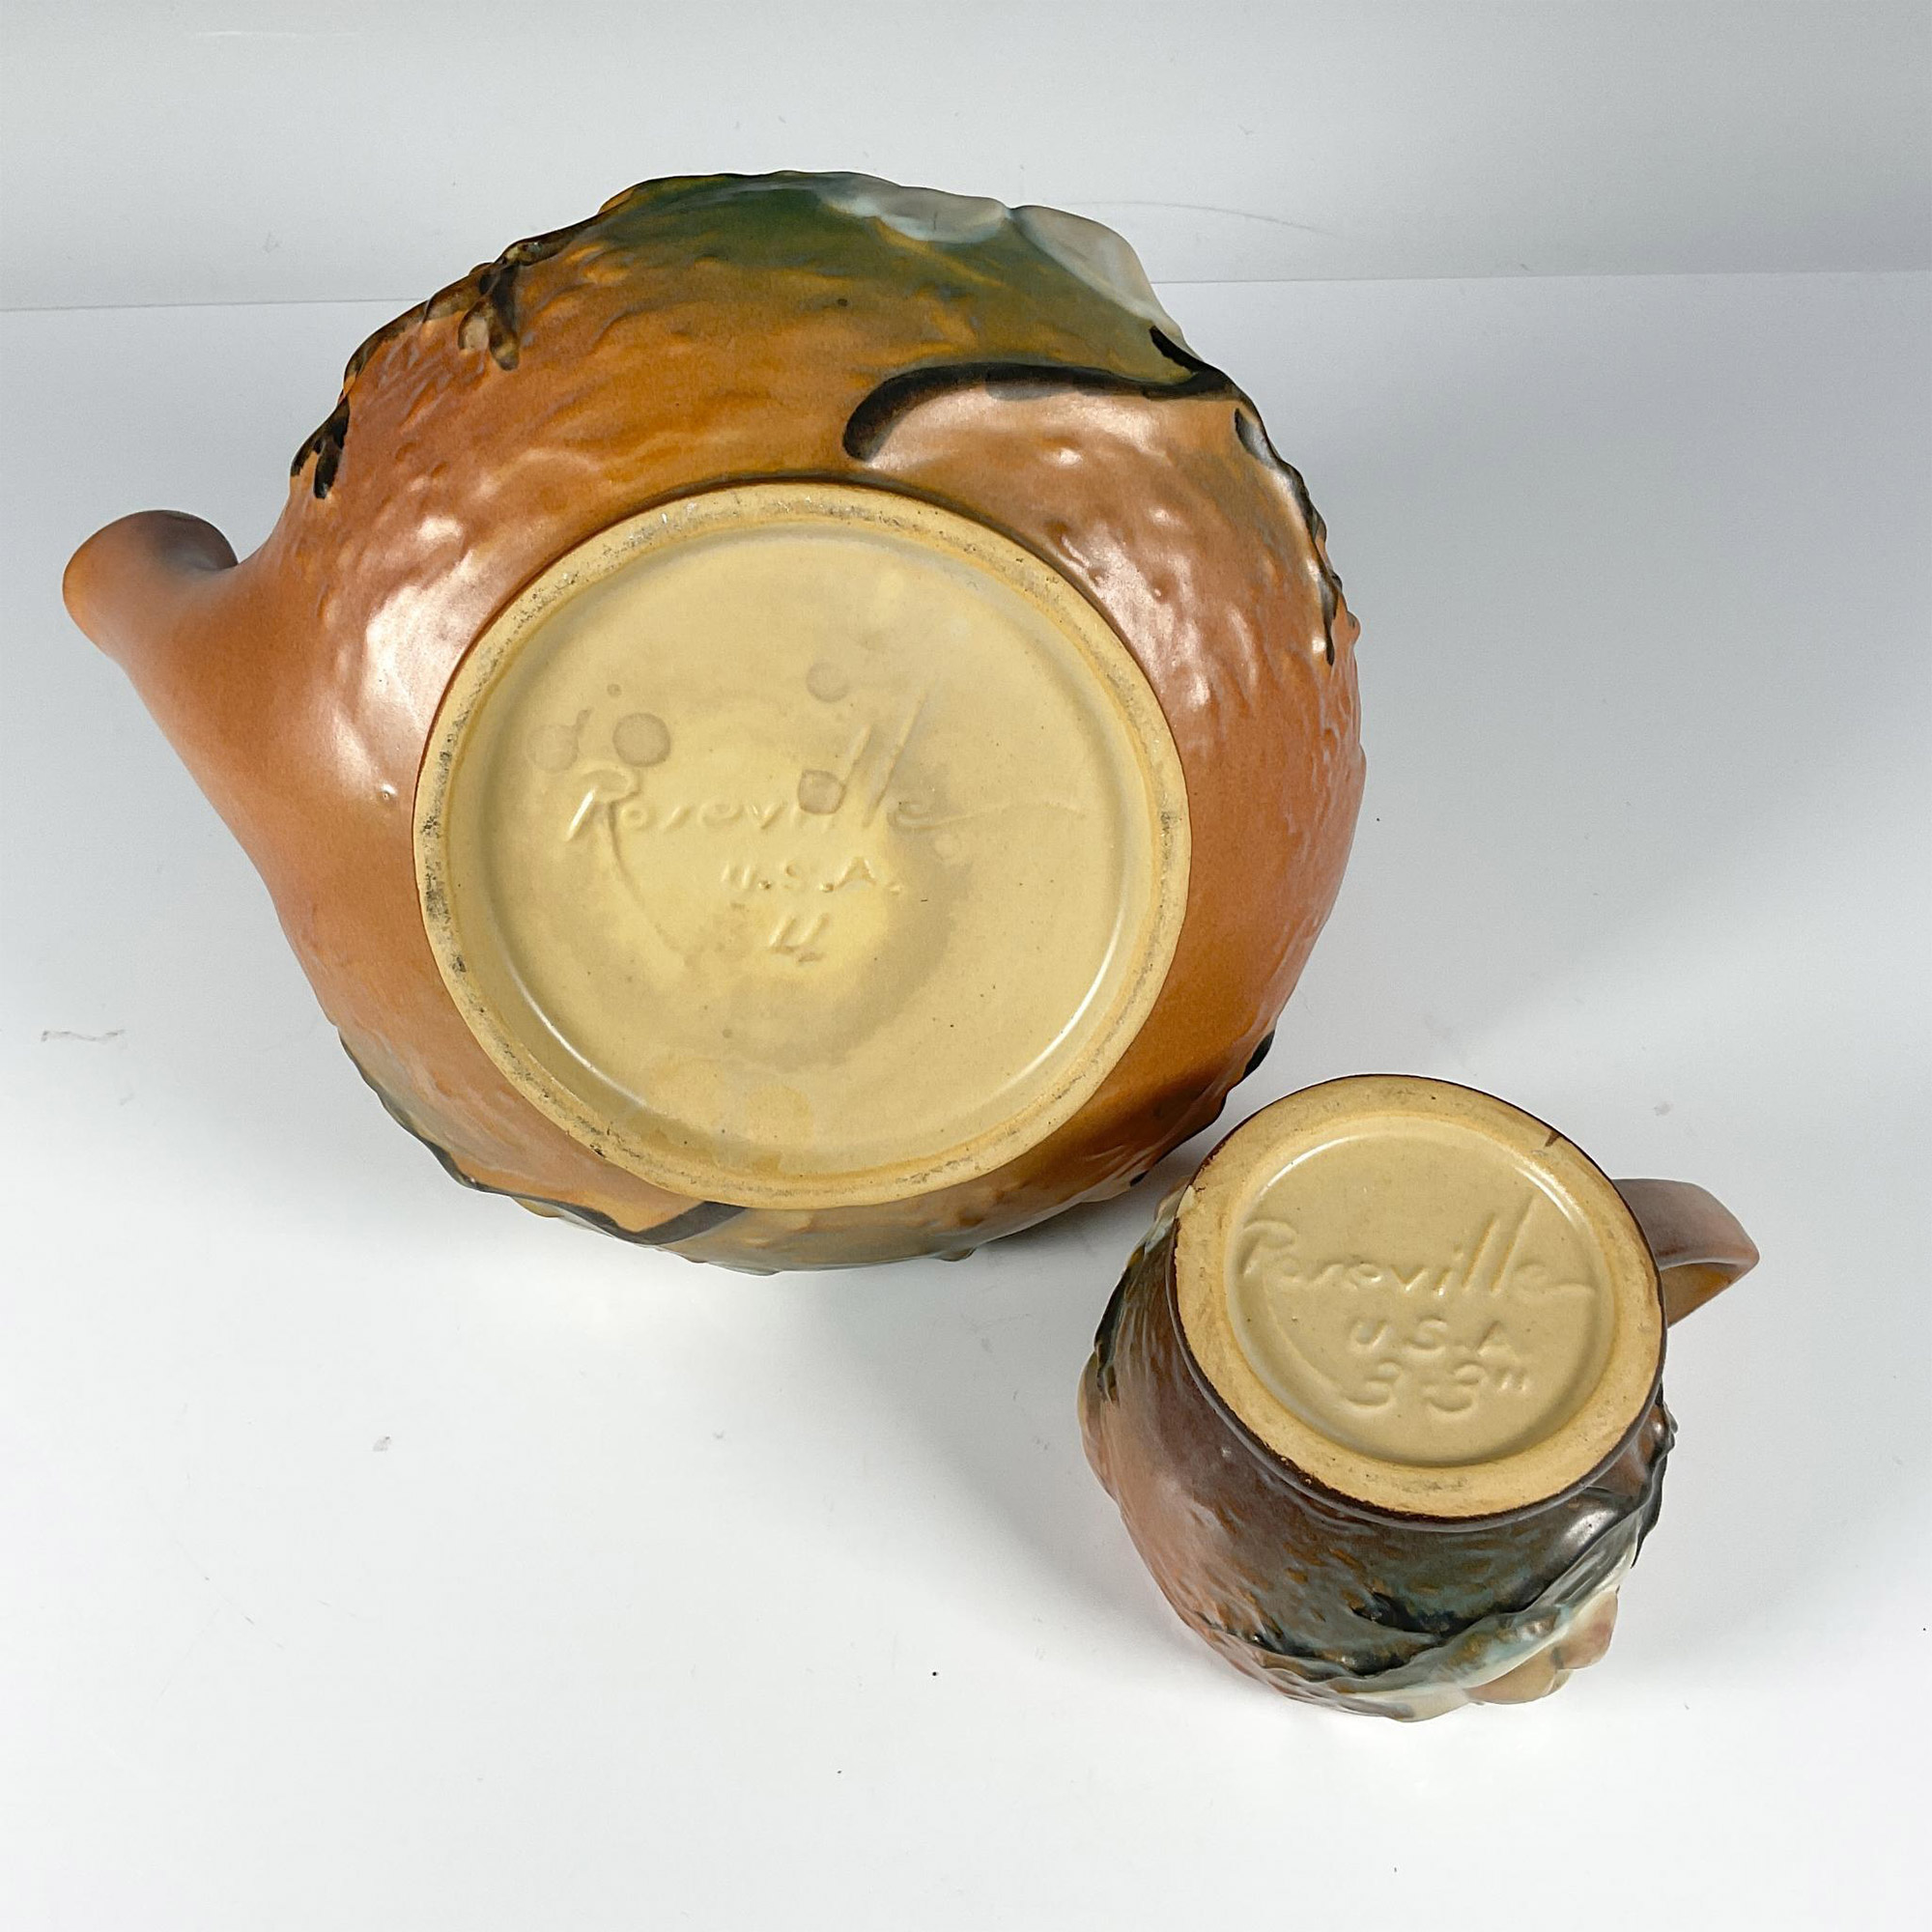 Roseville Pottery, Brown Magnolia Tea Pot and Cup - Image 3 of 3